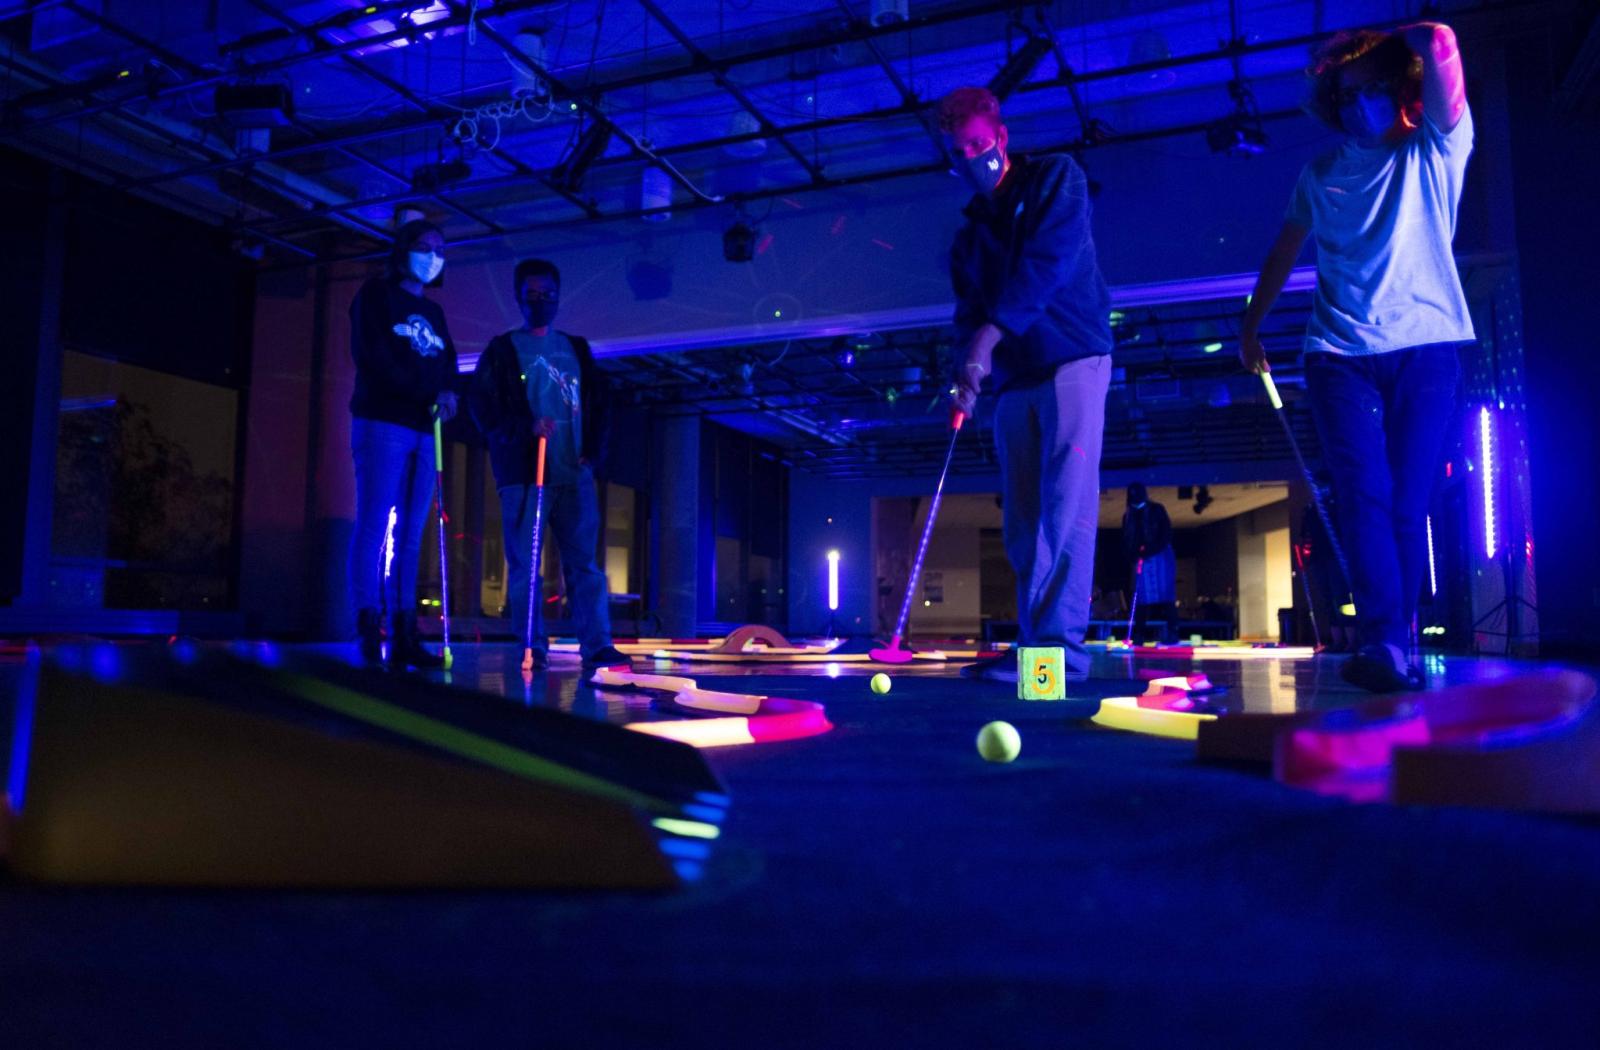 Four students playing glow-in-the-dark mini golf.